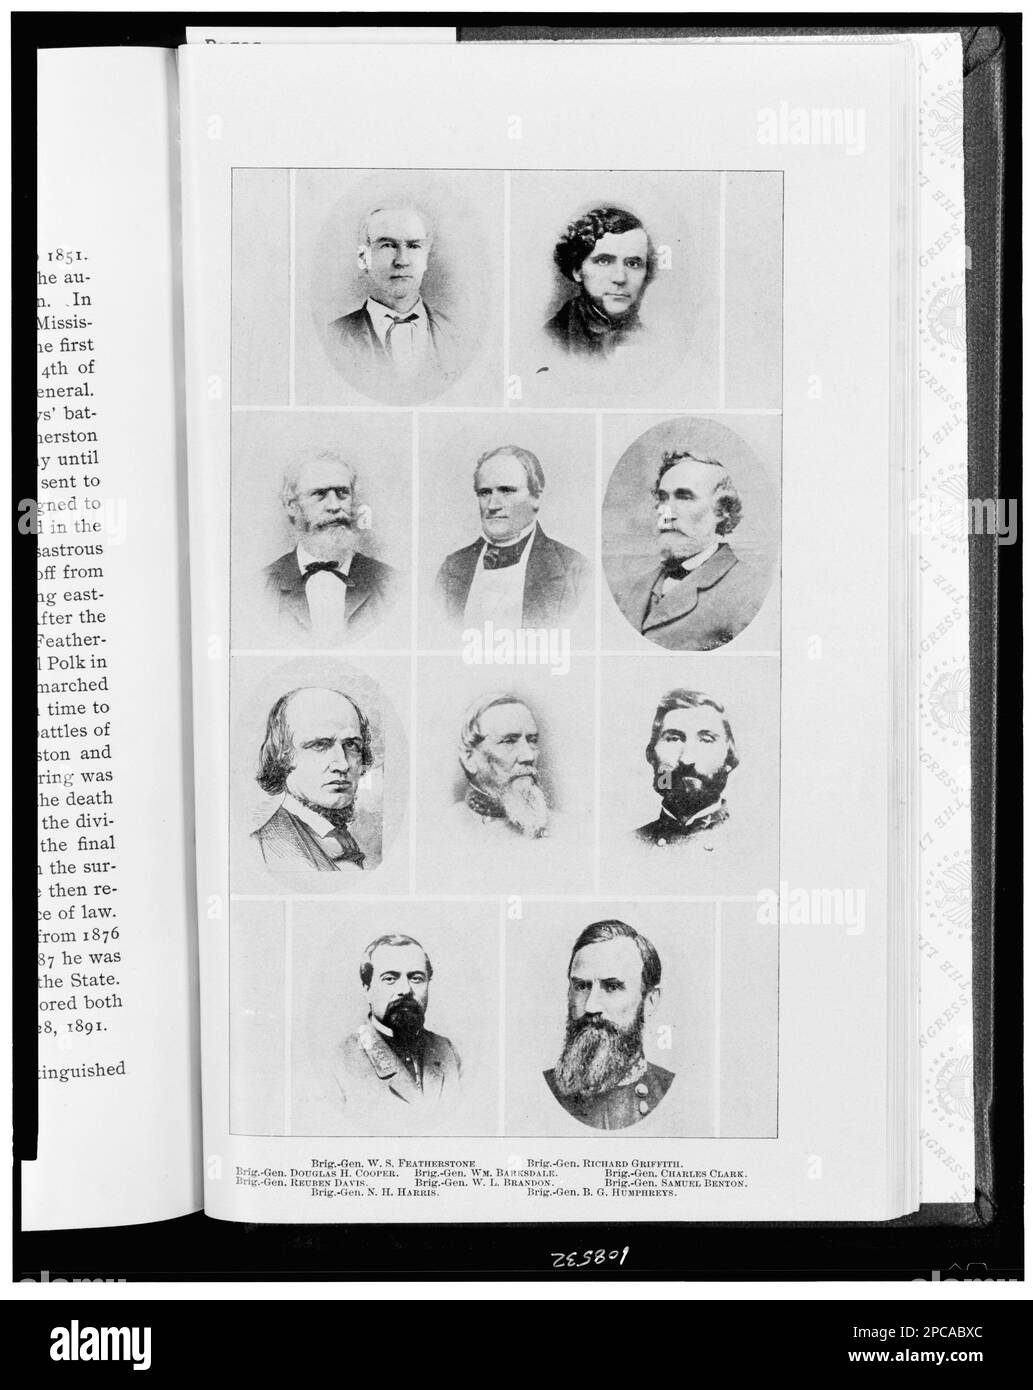 Brigadier-General W.S. Featherstone; Brigadier-General Richard Griffith; Brigadier-General Douglas H. Cooper; Brigadier-General Wm. Barksdale; Brigadier-General Charles Clark; Brigadier-General Reuben Davis; Brigadier-General W.L. Brandon; Brigadier-General Samuel Benton; Brigadier-General N.H. Harris; Brigadier-General B.G. Humphreys. Illus. in: Confederate military history / .. edited by Gen. Clement A. Evans of Georgia. Atlanta, Ga. : Confederate Publishing Company, 1899, vol. 7, oppos. p. 252, Reference copy in LOT 4421-B. United States, History, Civil War, 1861-1865, Military personnel, C Stock Photo